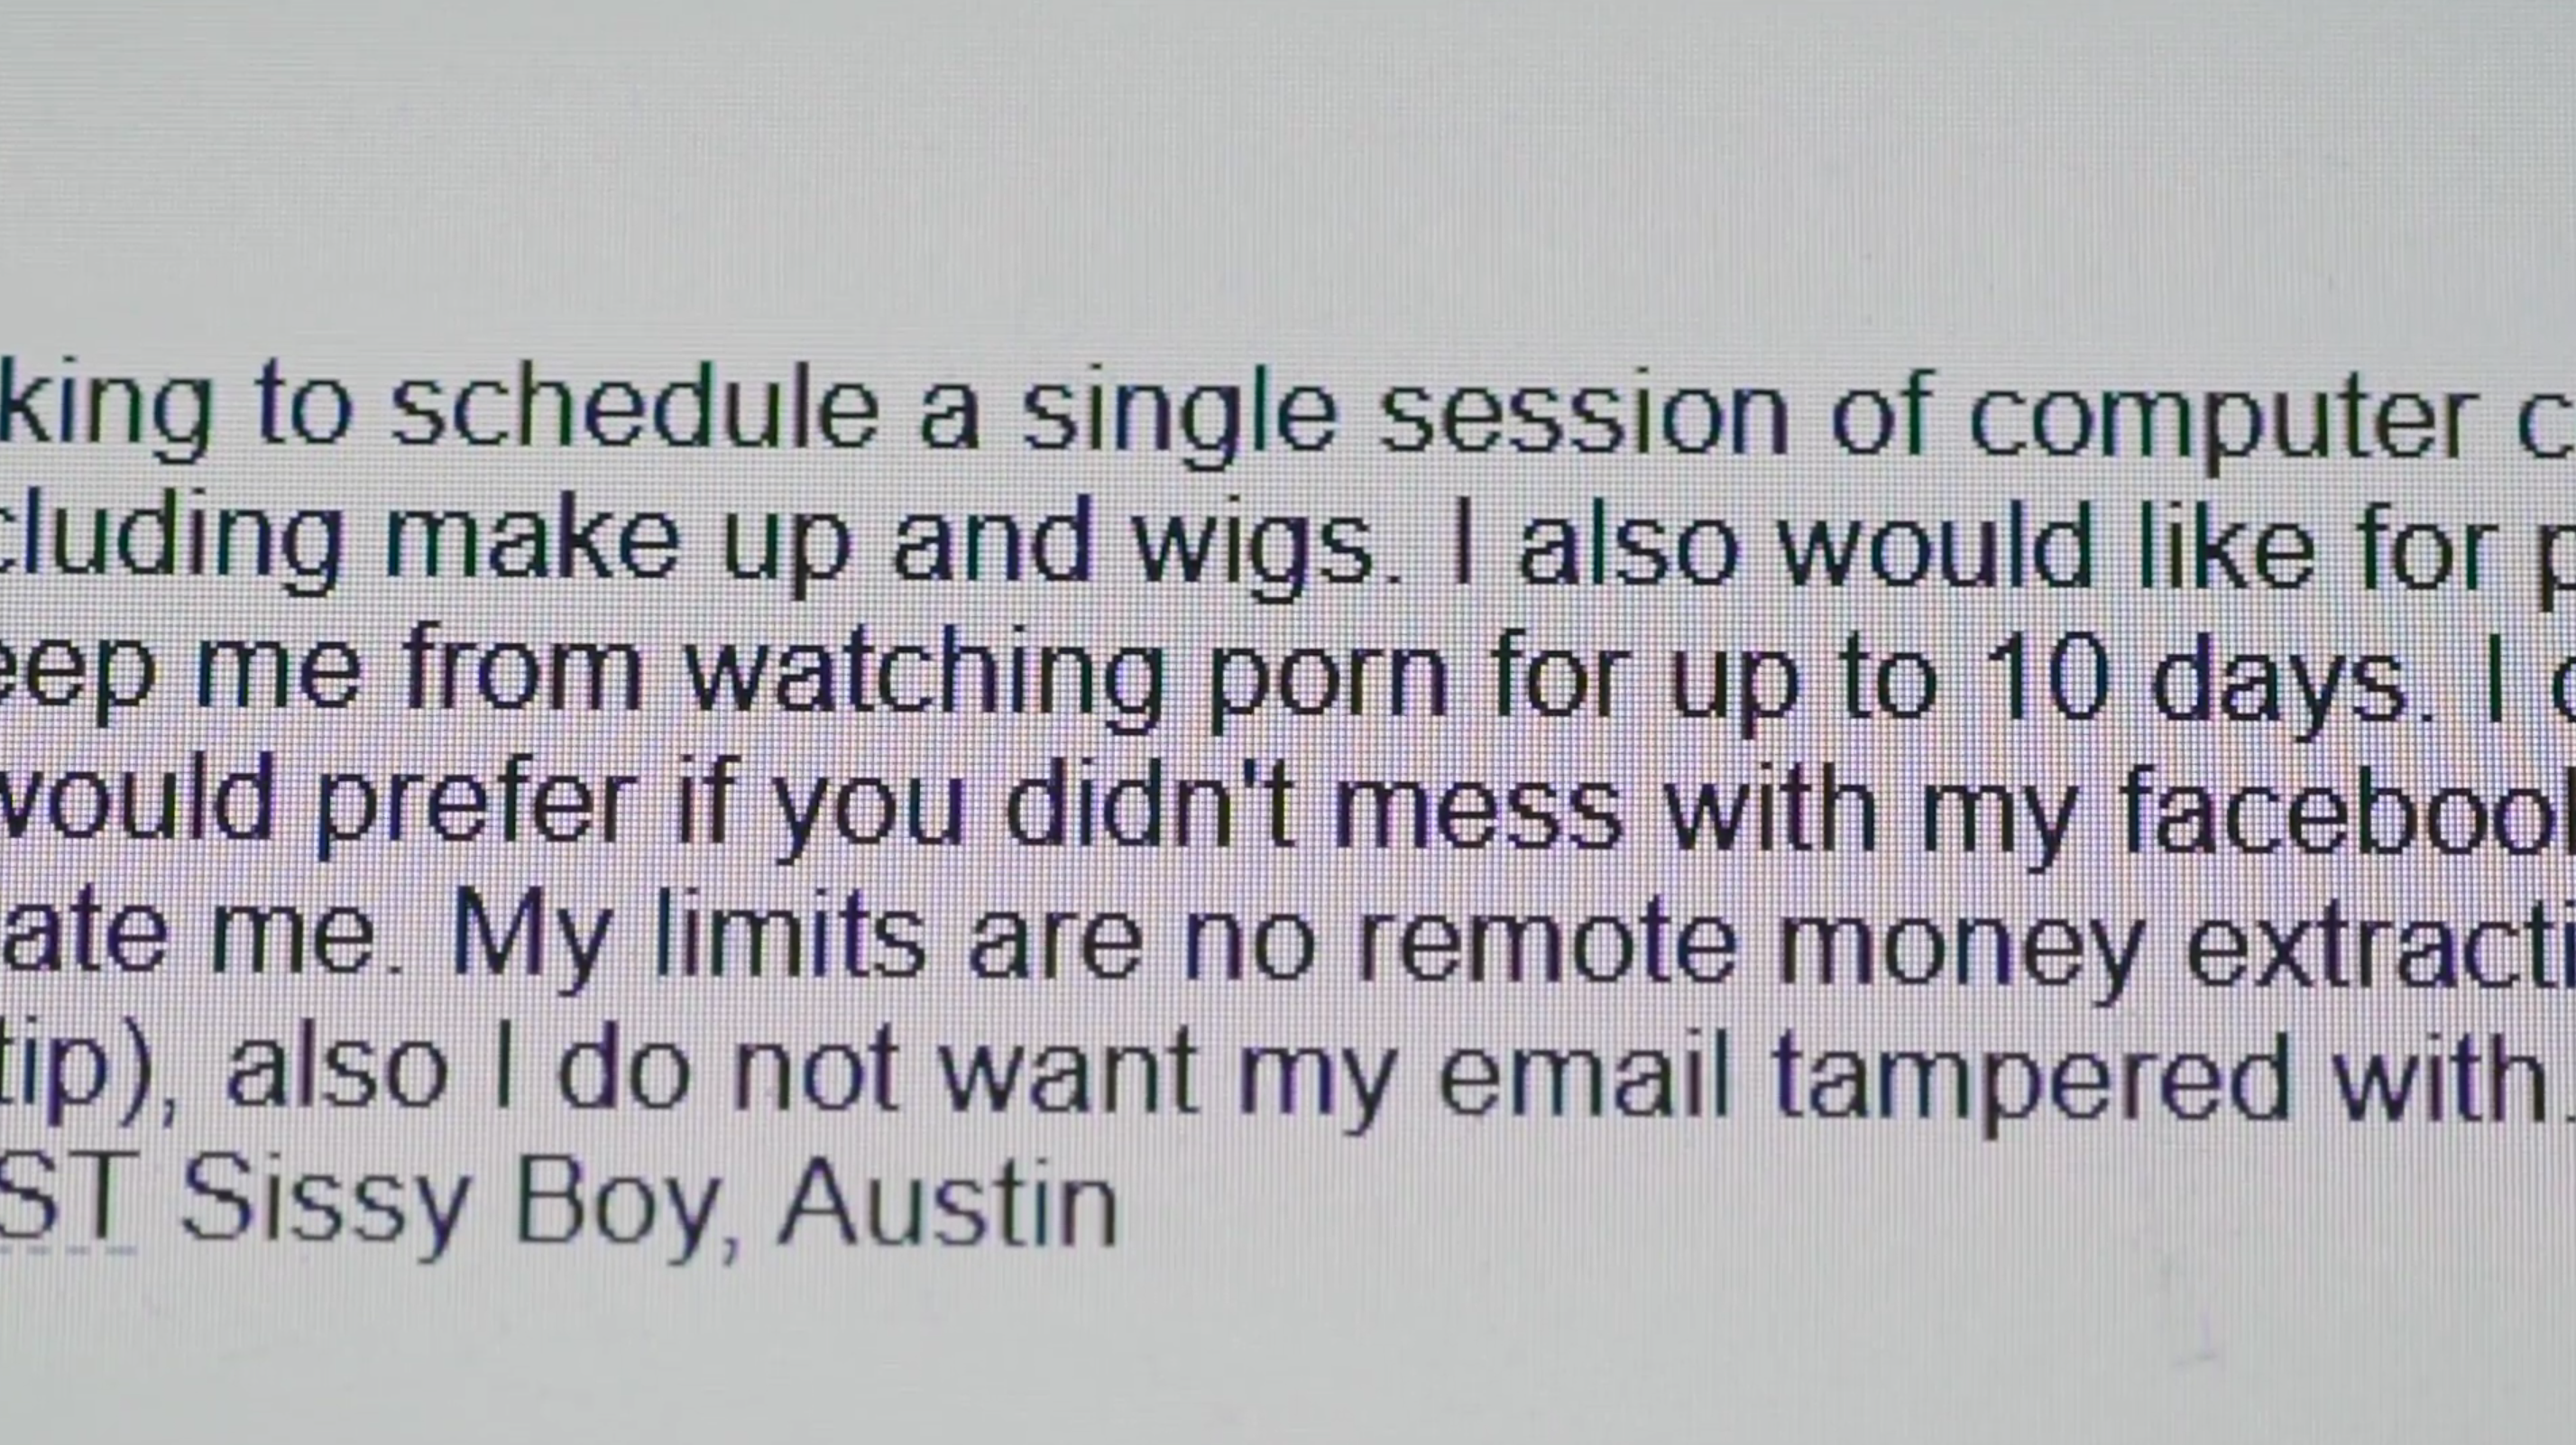 Image of a computer screen zoomed up to show Sissy Boy Austin sending a message asking to schedule a single session, restricting their porn use, preferring not to have their facebook or email tampered with, and their limits regarding money.